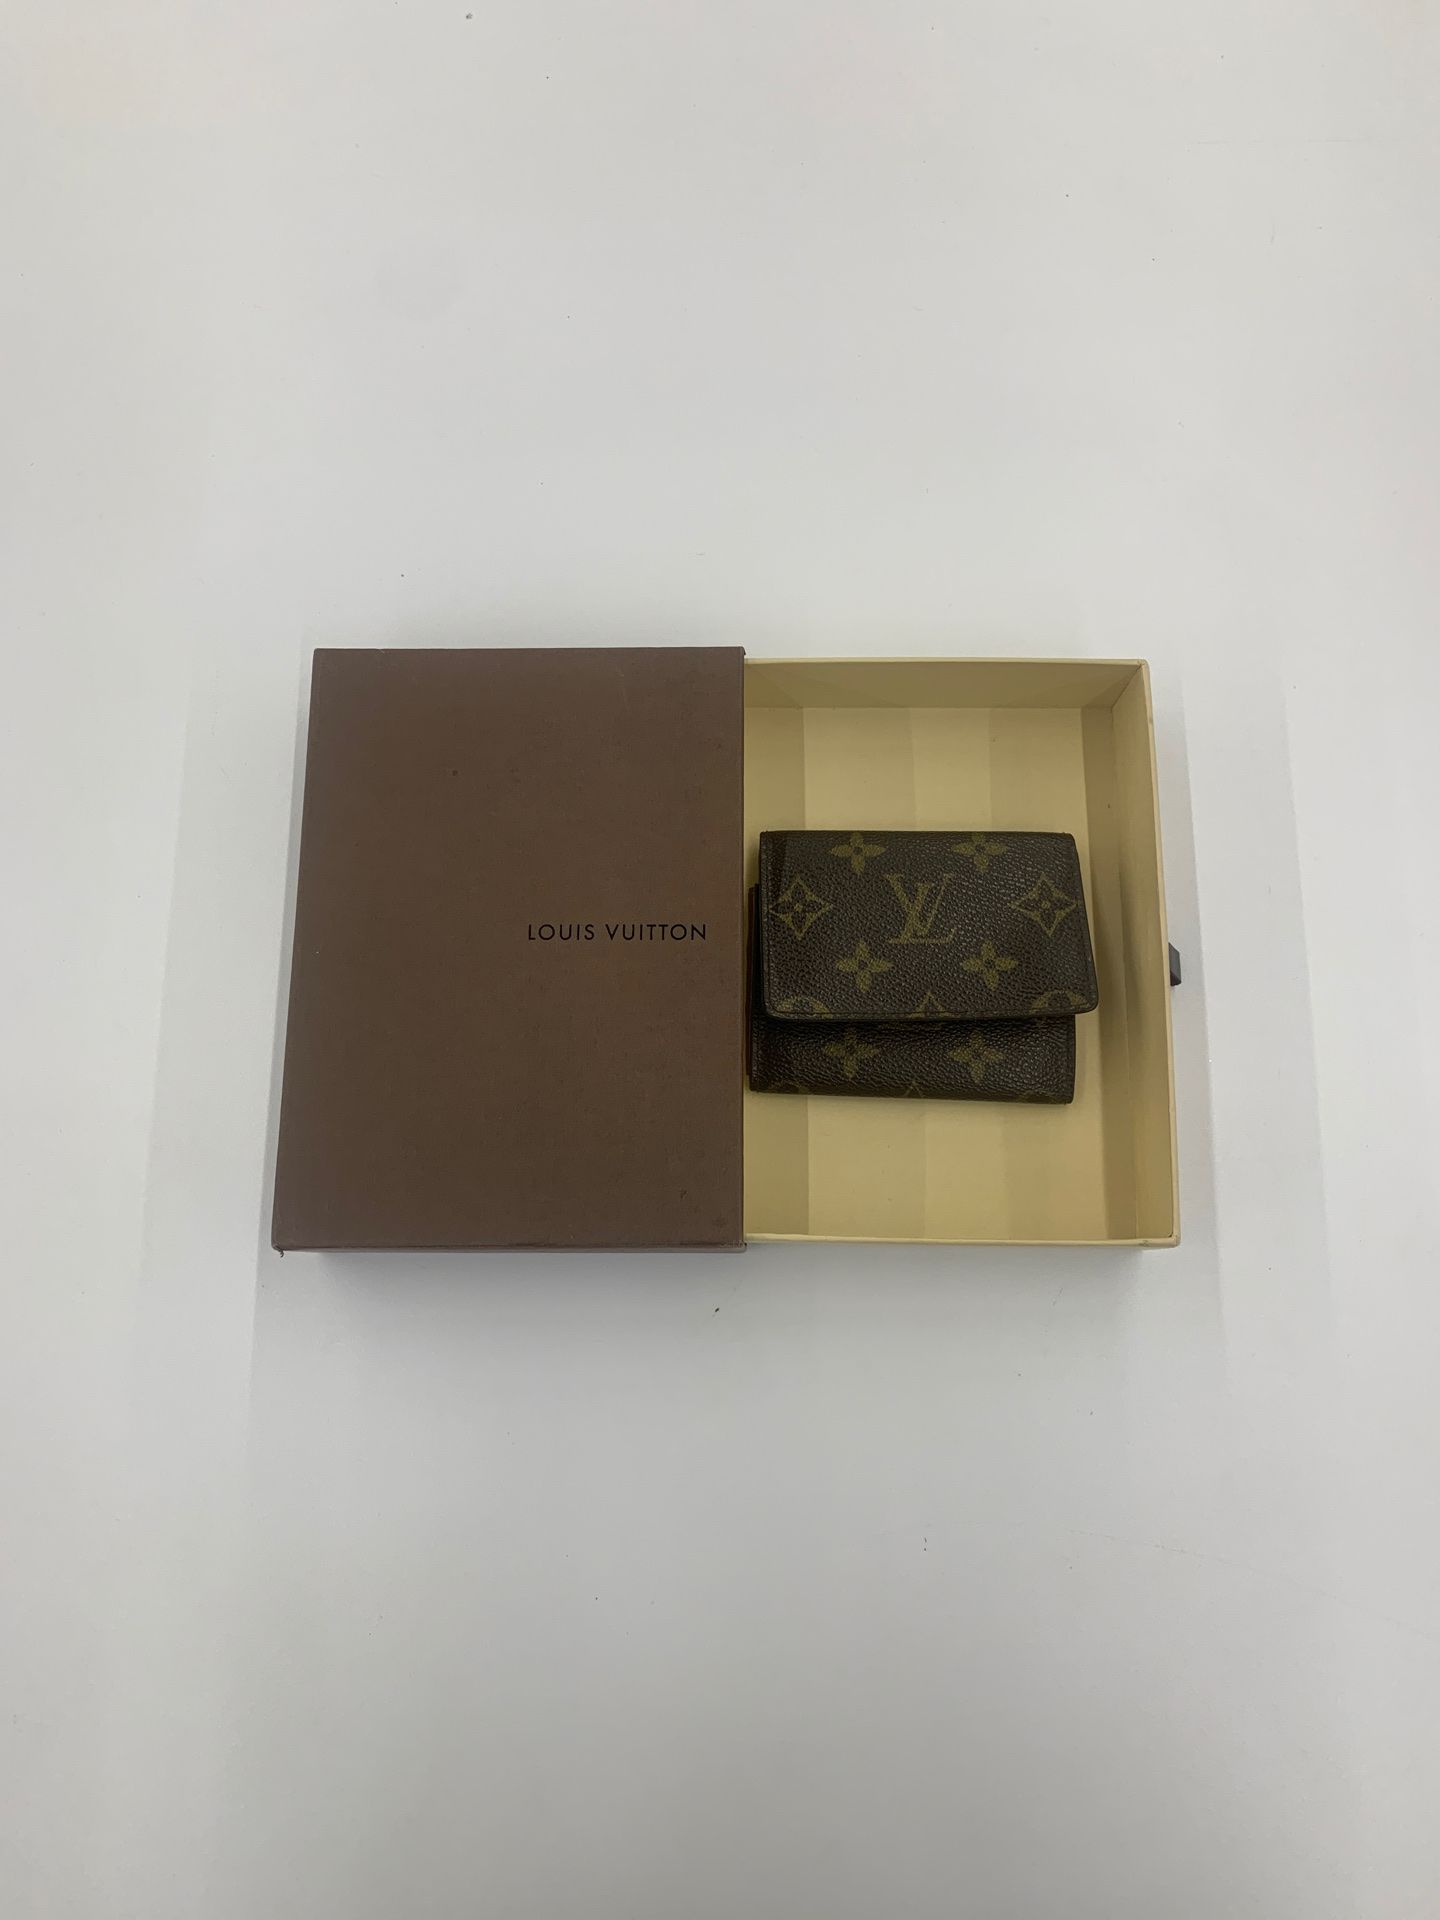 Louis Vuitton Monogram Business Card Holder M62920 for Sale in Santa Ana,  CA - OfferUp